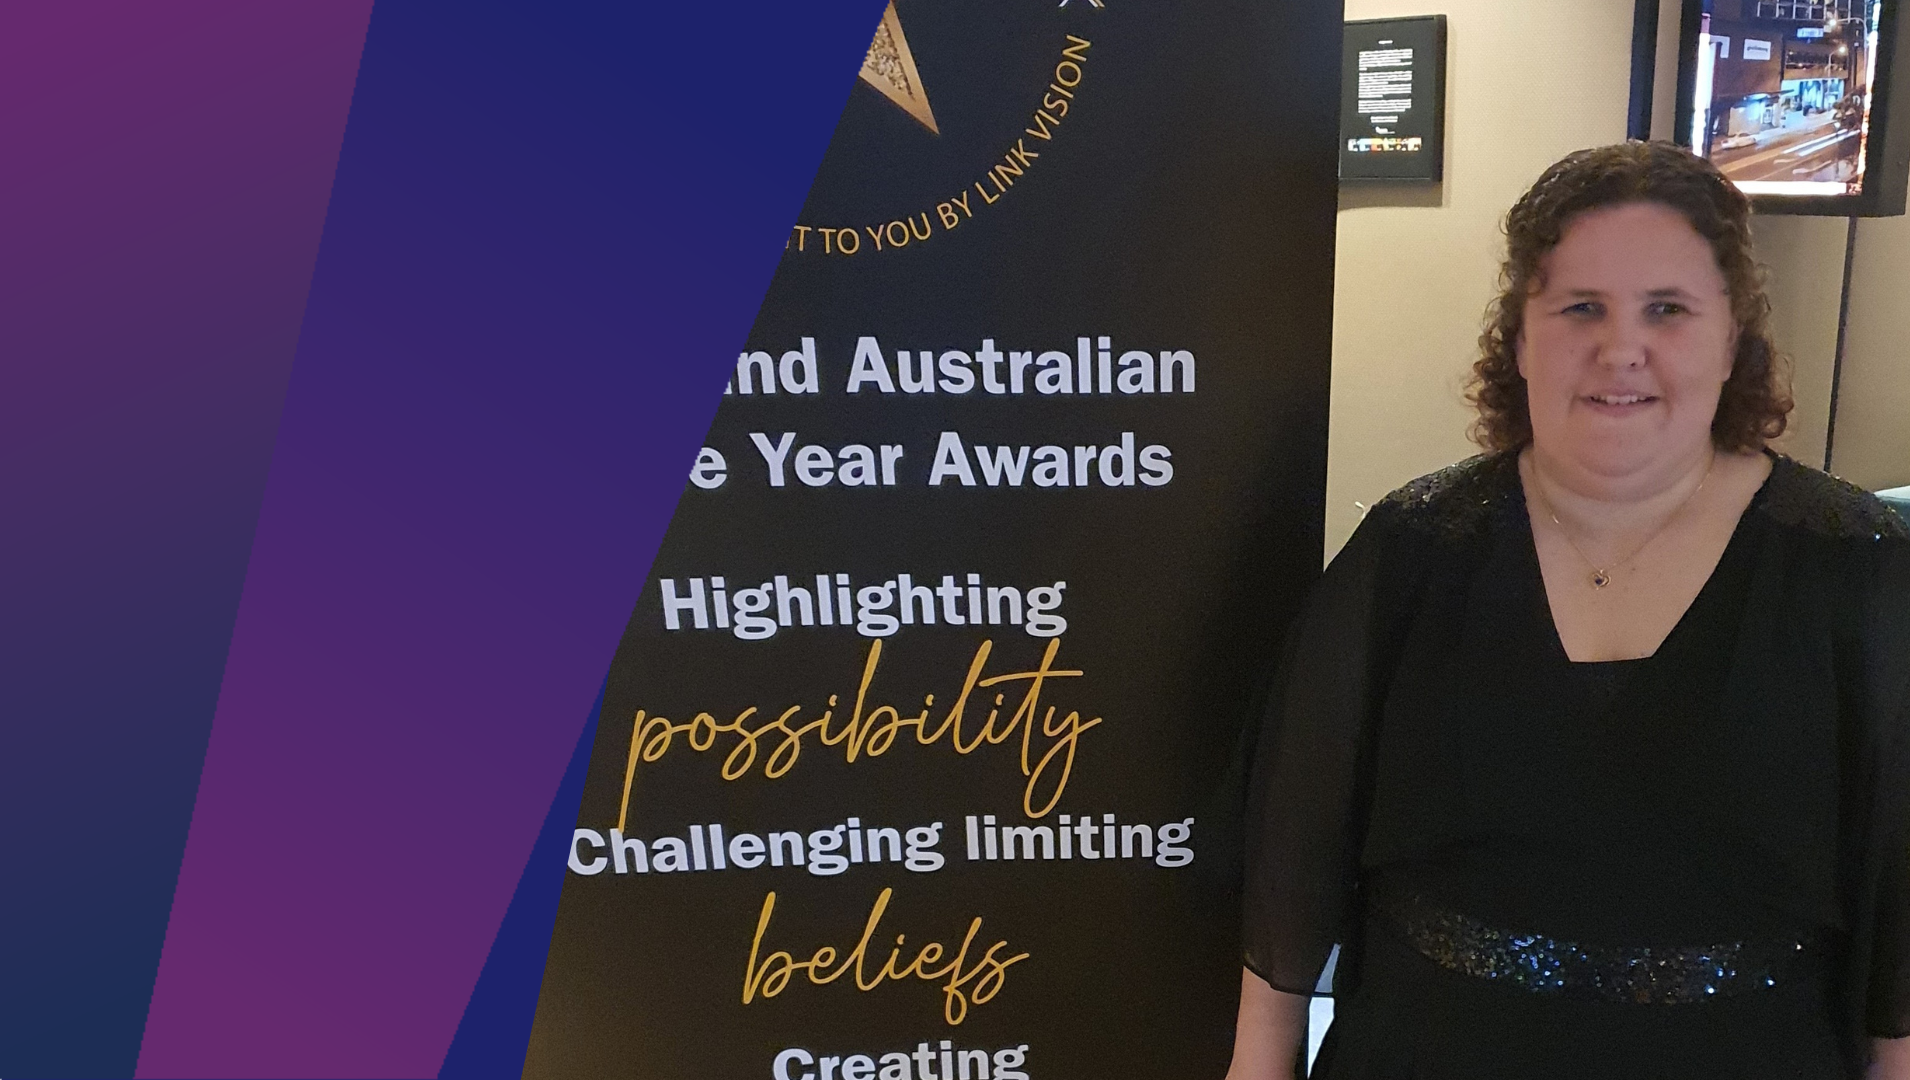 APM Communities team member Ayesha Patterson was recently nominated as a finalist for Blind Australian of the Year.